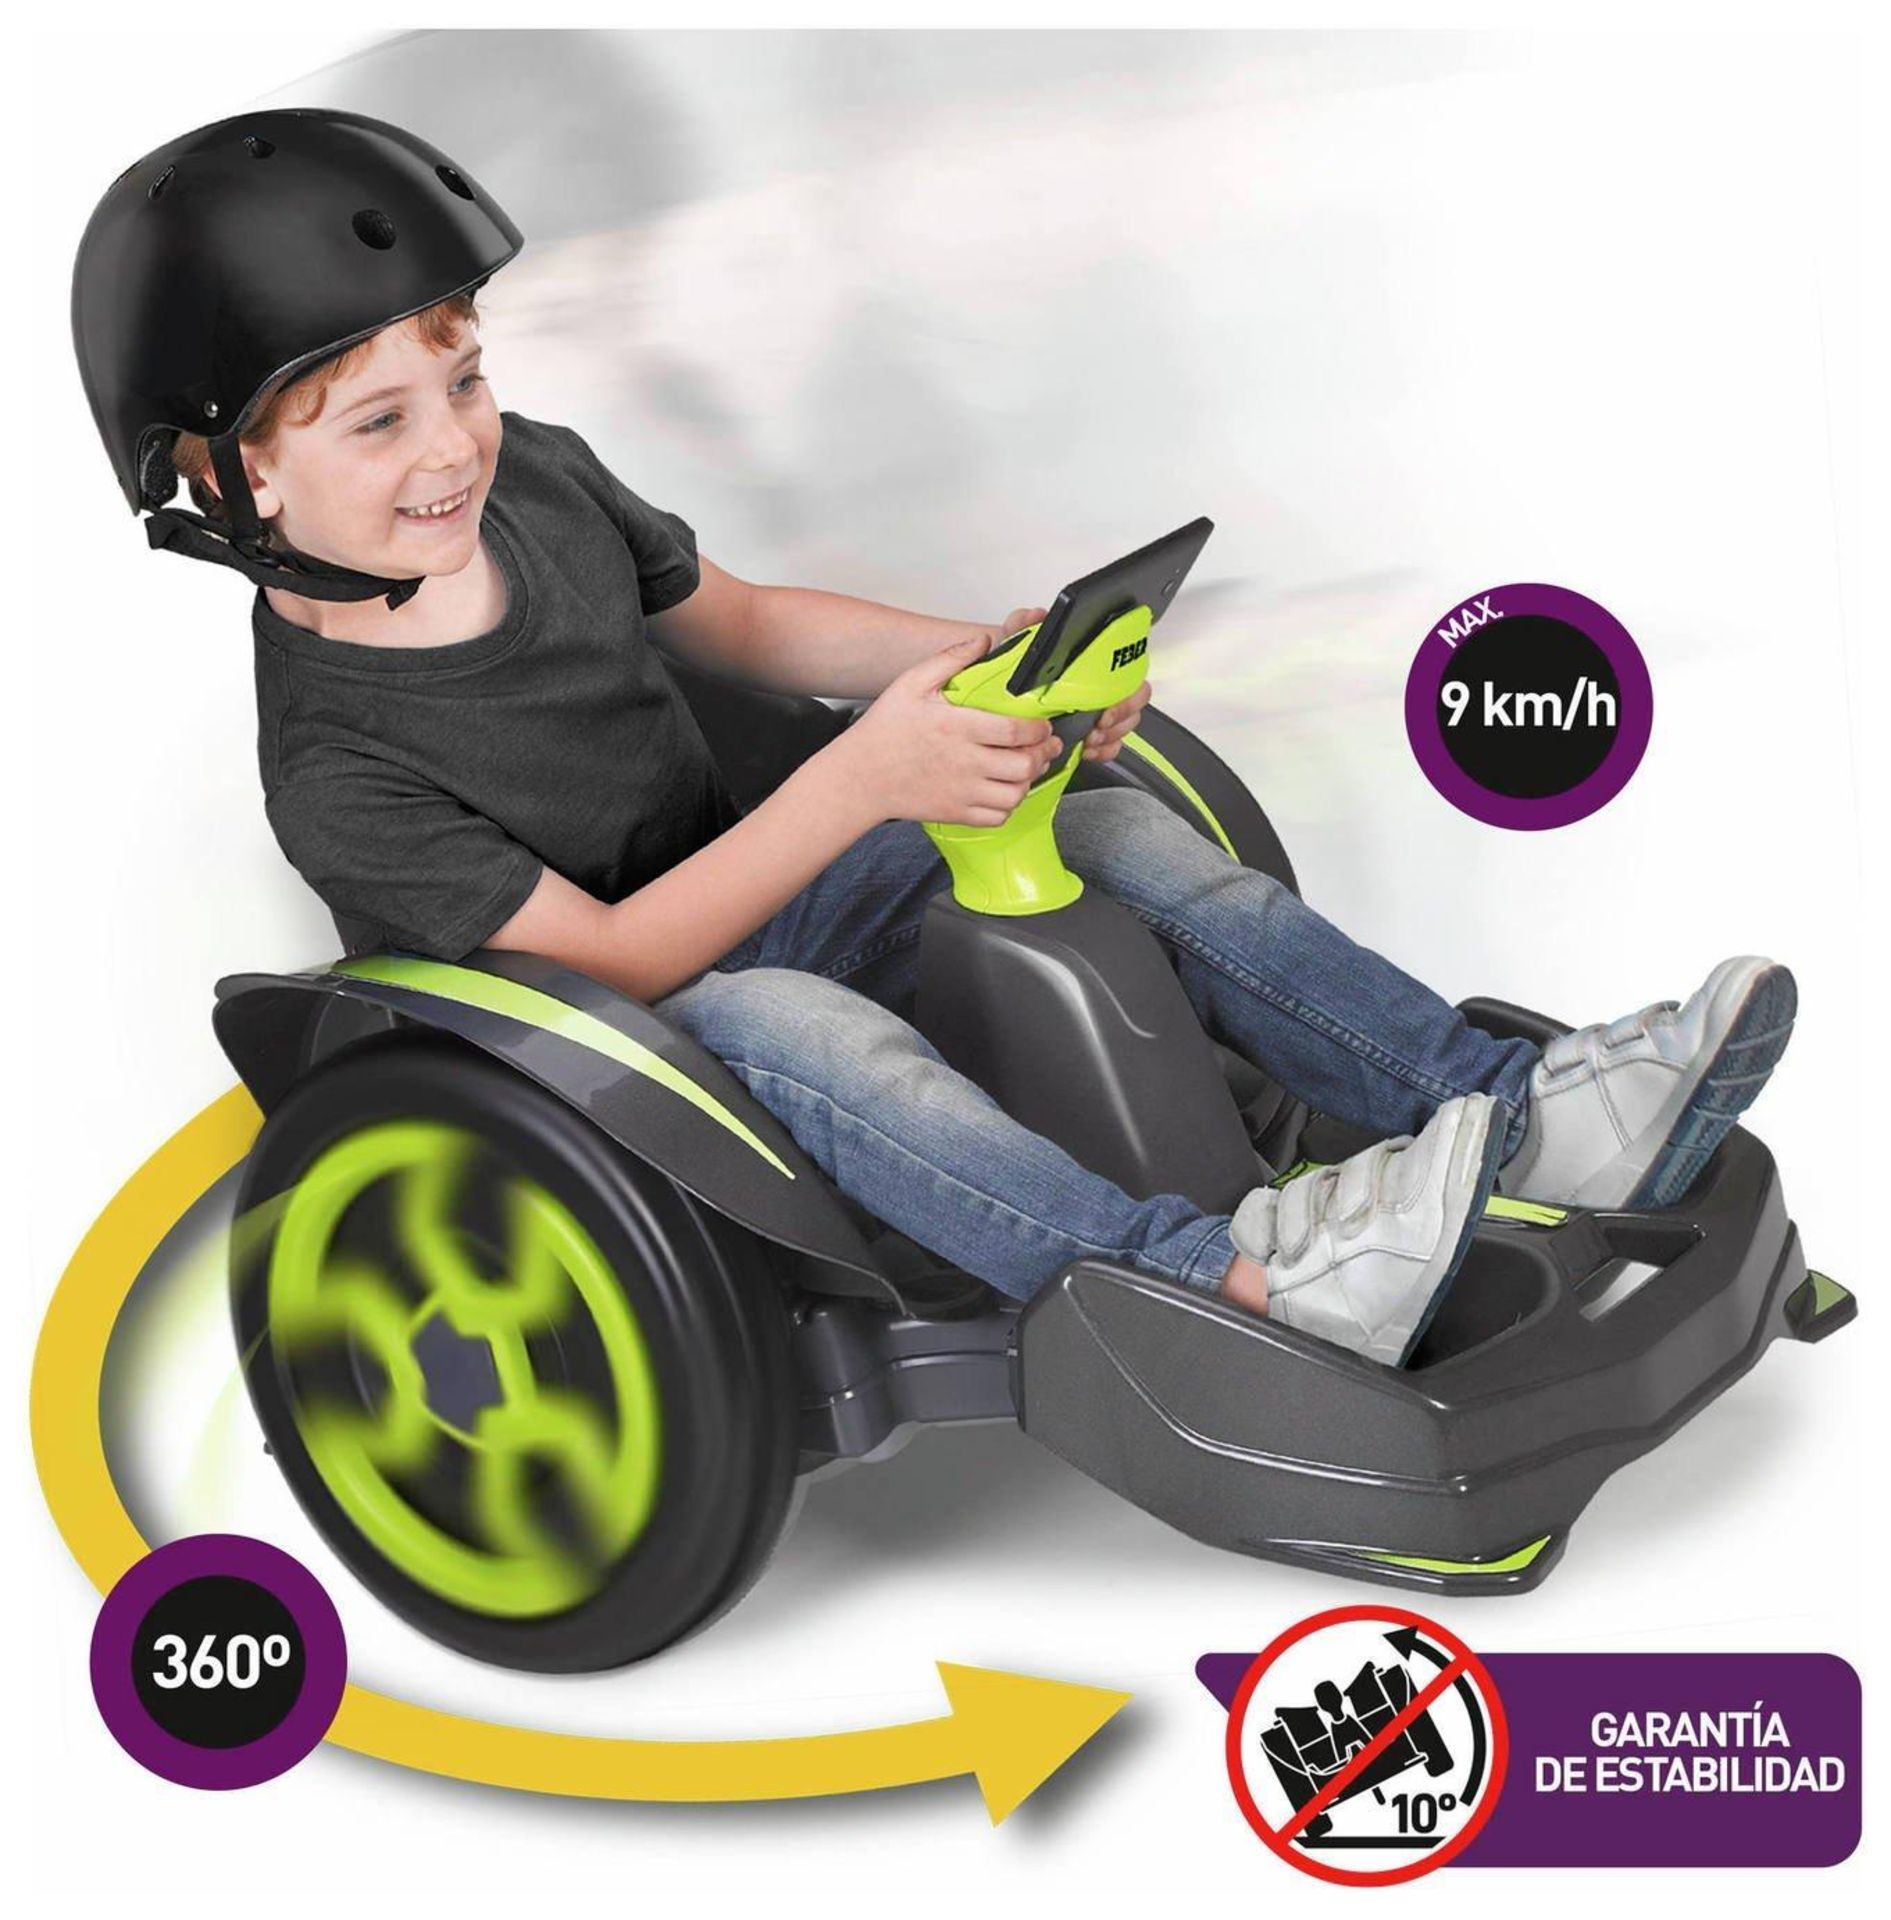 Mad Racer 12V Powered Ride On, £219.99 RRP